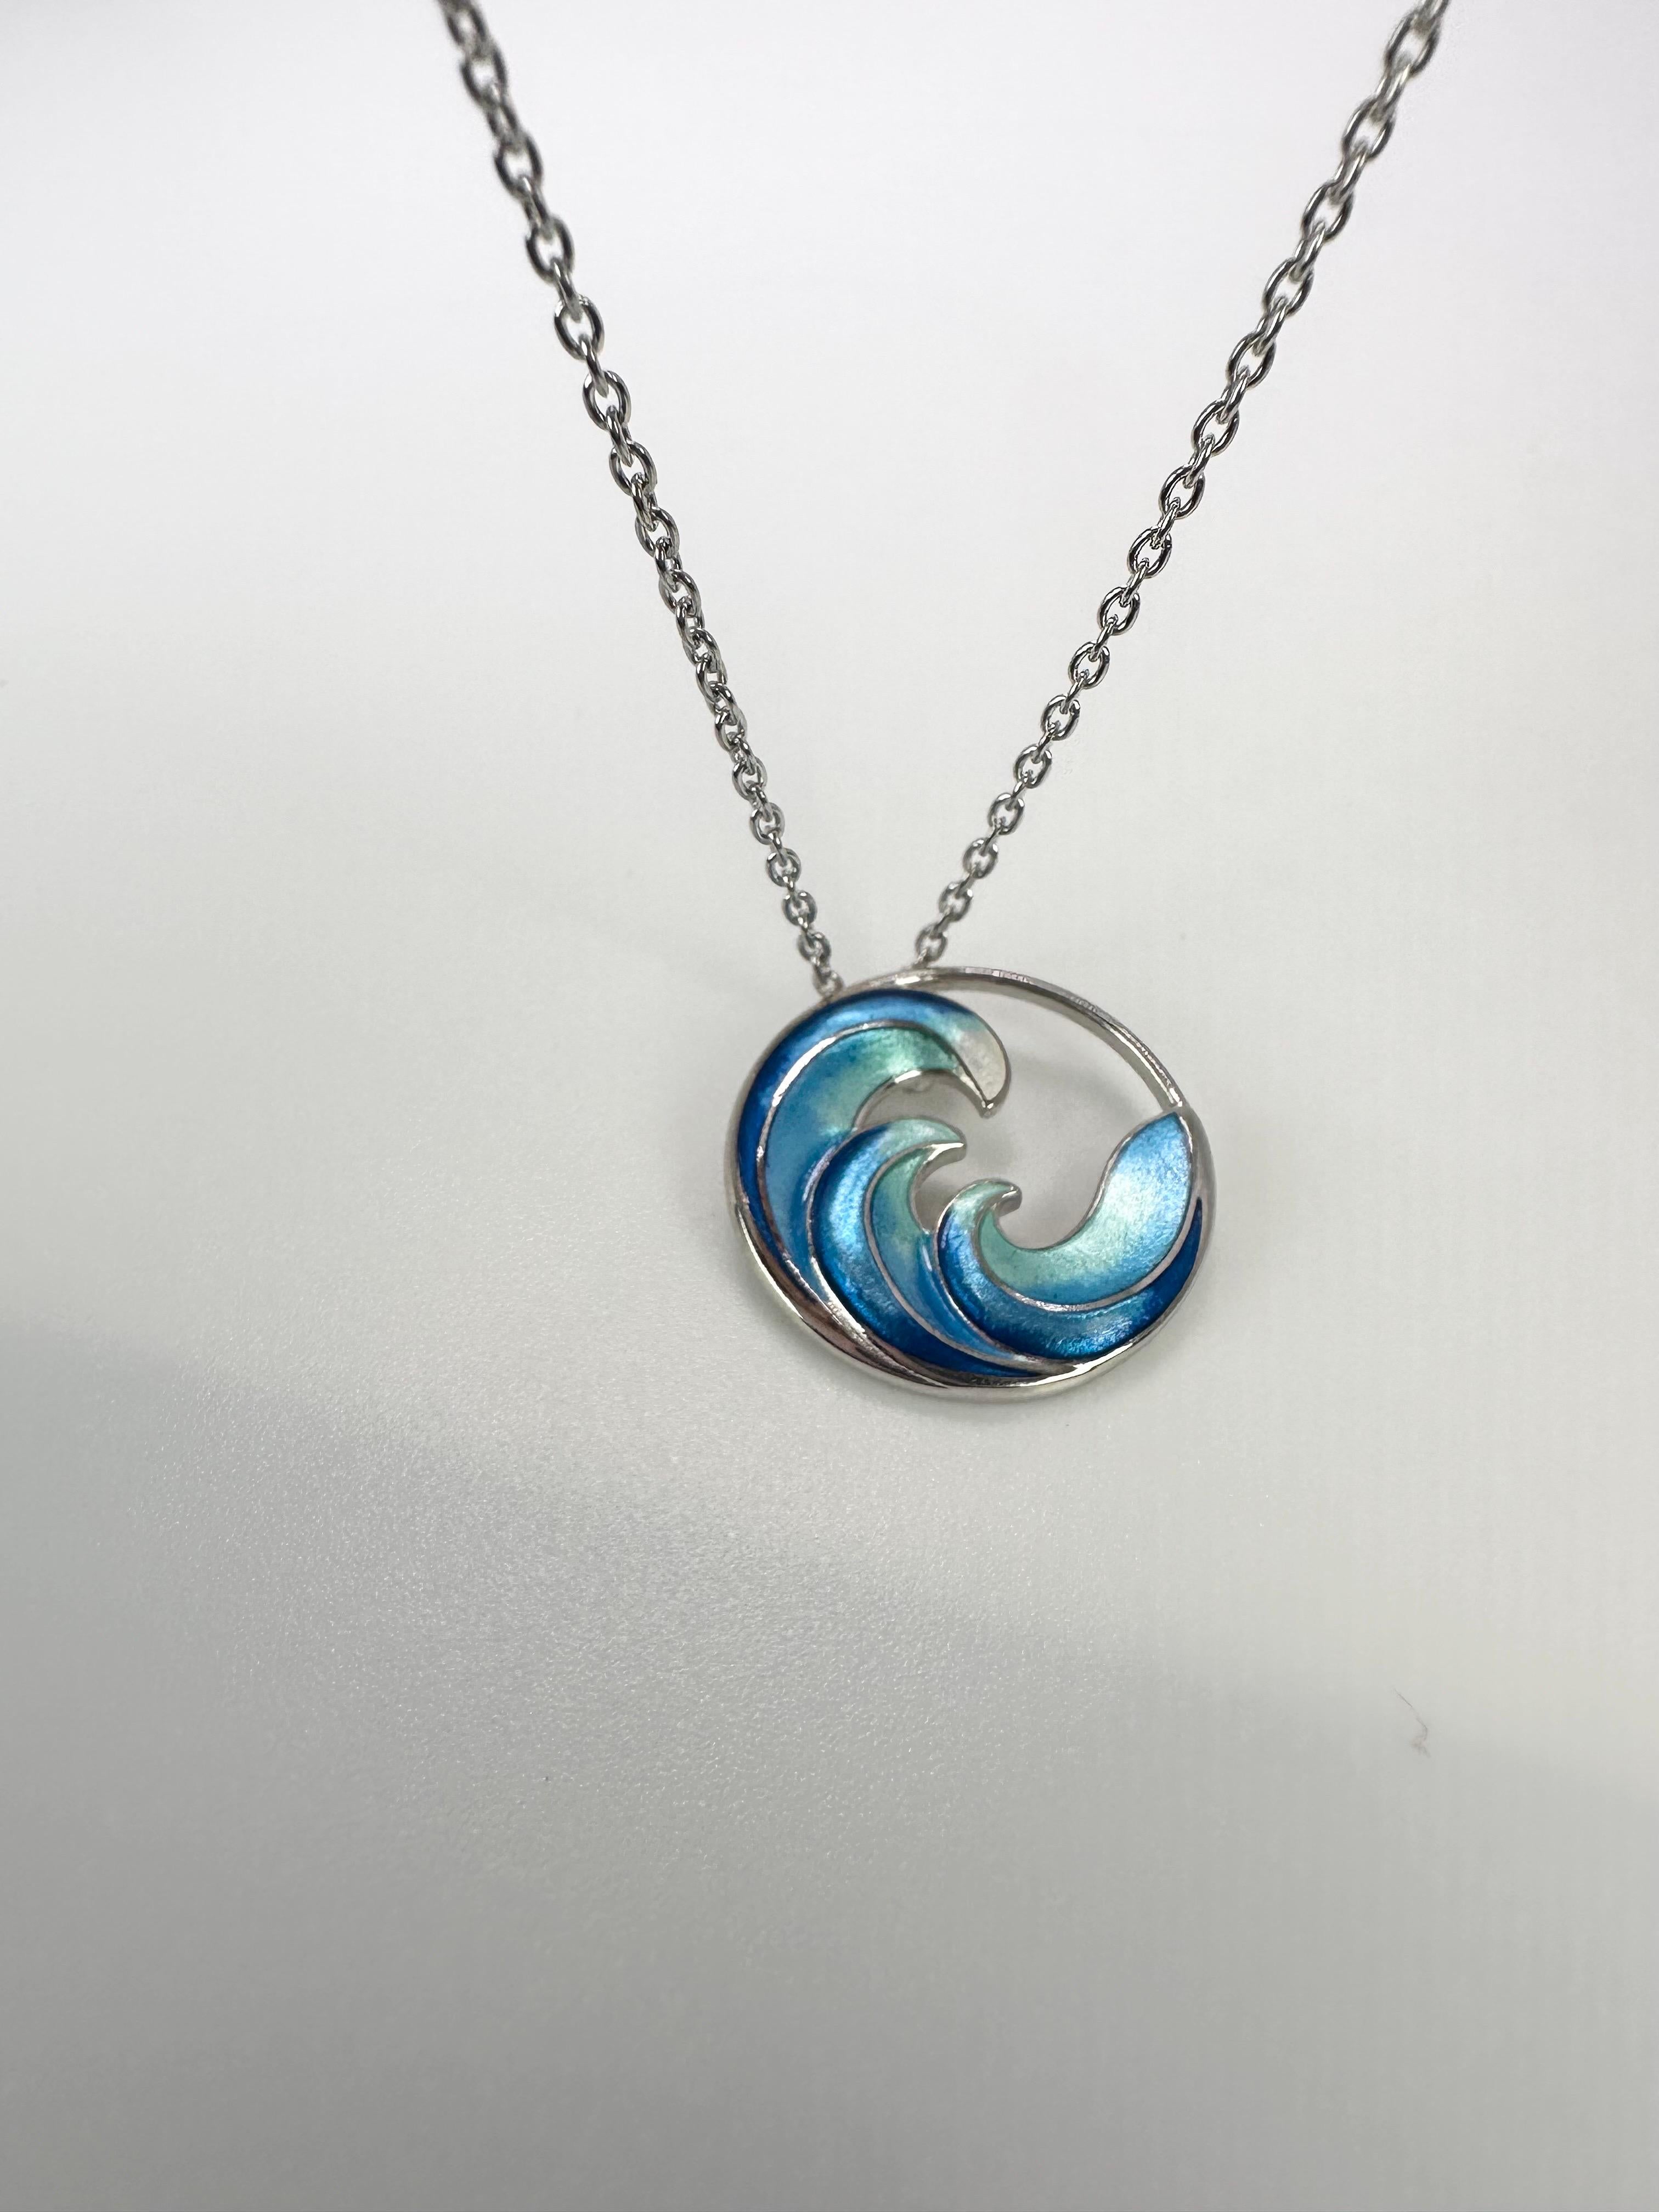 Glass enamel in a unique presentation and design, using array of colors that will never fade. 
METAL: silver 925
Grams:7
Item: 64000002fa
Chain included

WHAT YOU GET AT STAMPAR JEWELERS:
Stampar Jewelers, located in the heart of Jupiter, Florida,